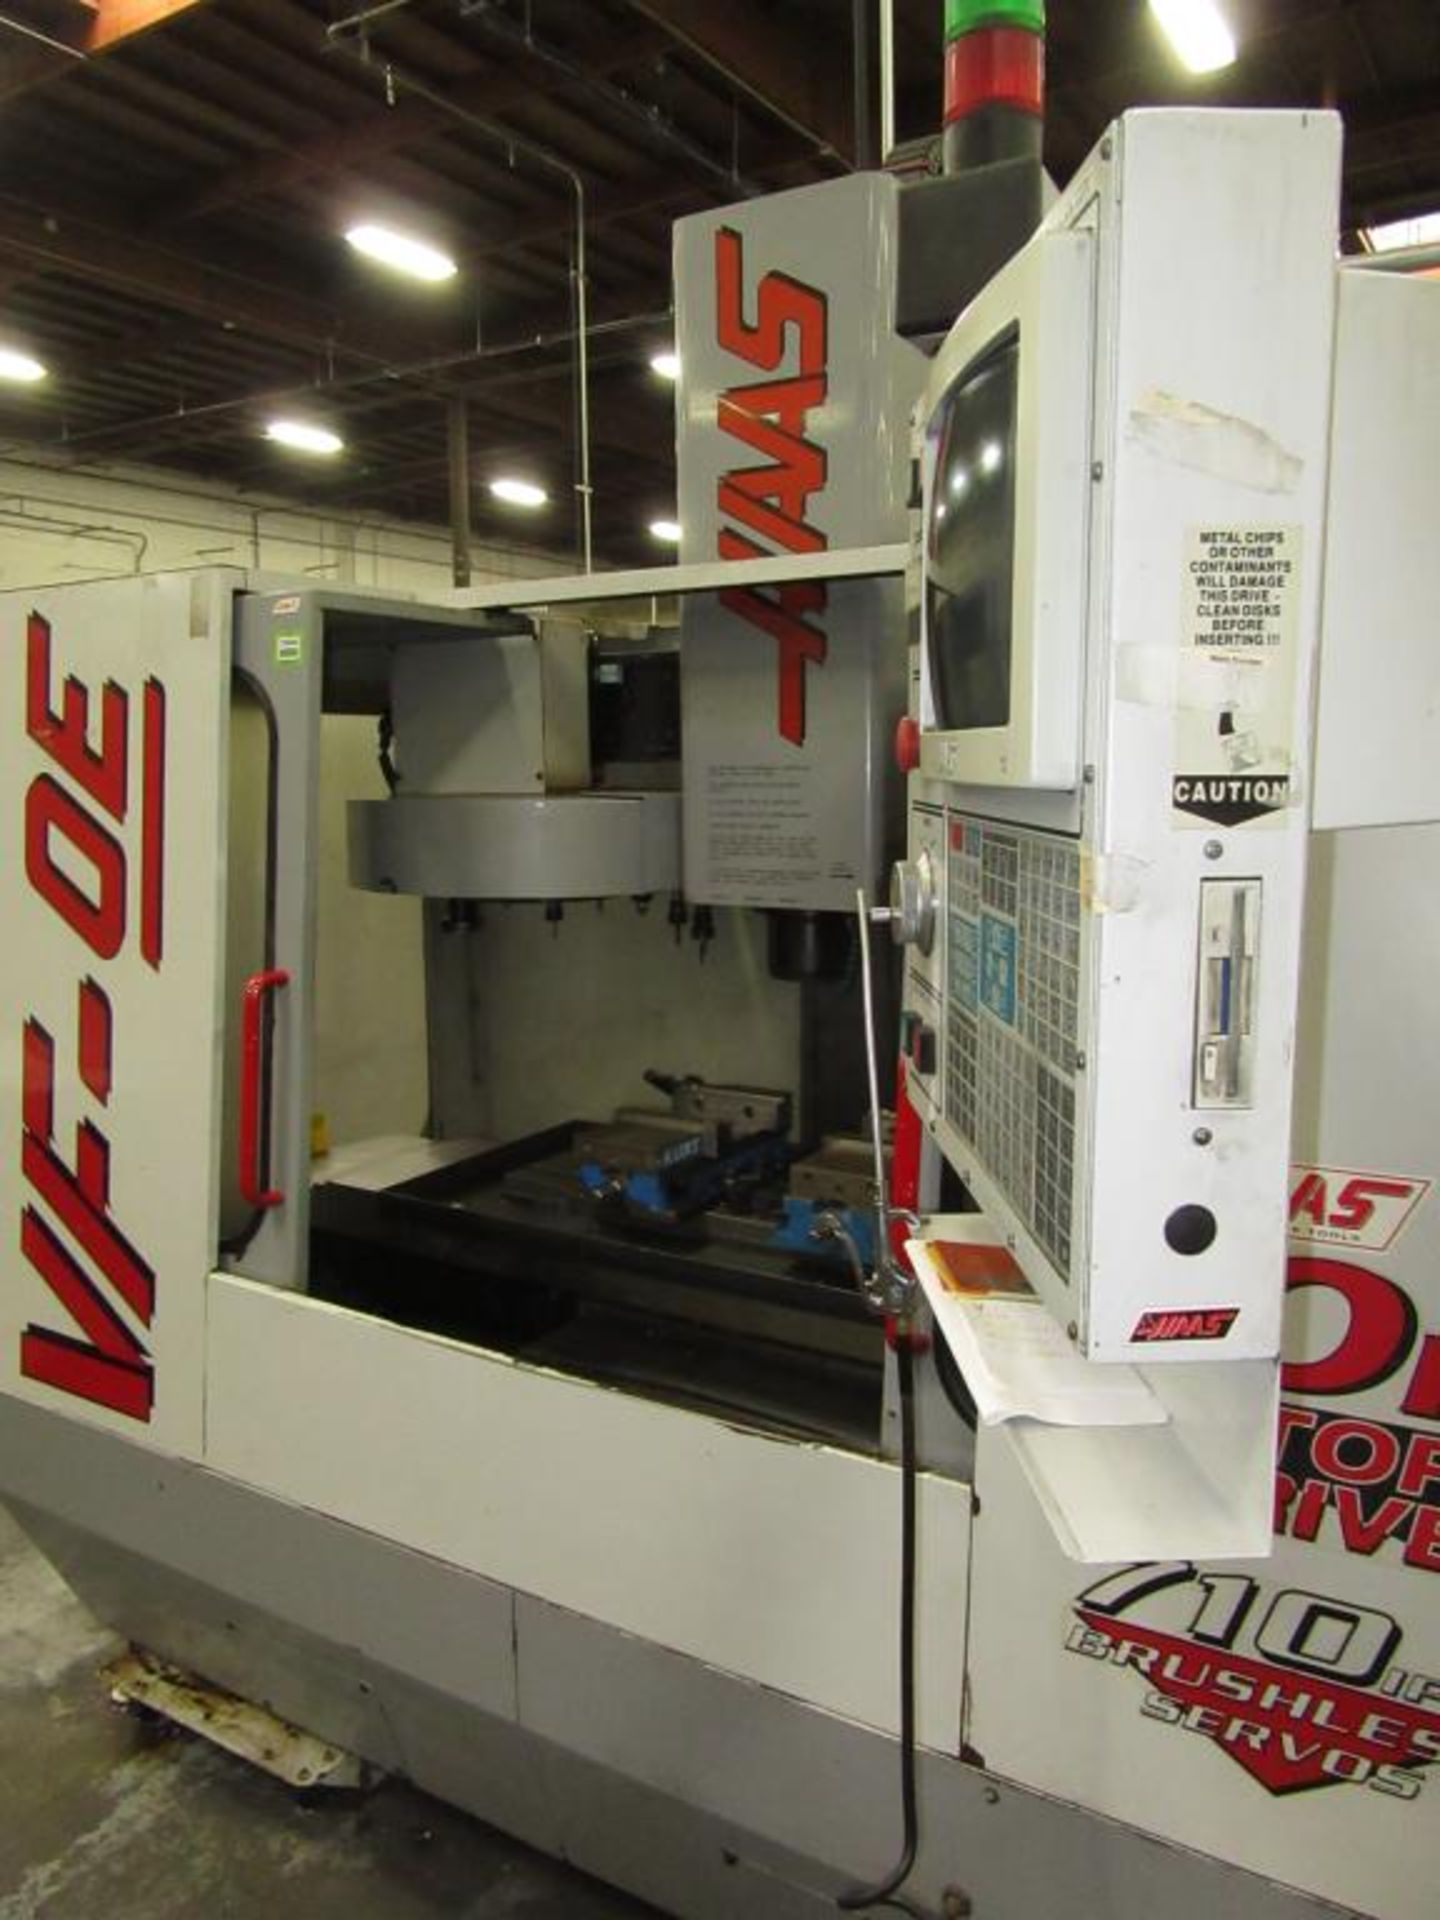 Haas VF-OE. 1997 - CNC Vertical Machining Center with Haas 3-Axis Control Panel, Table Size 36"L x - Image 8 of 12